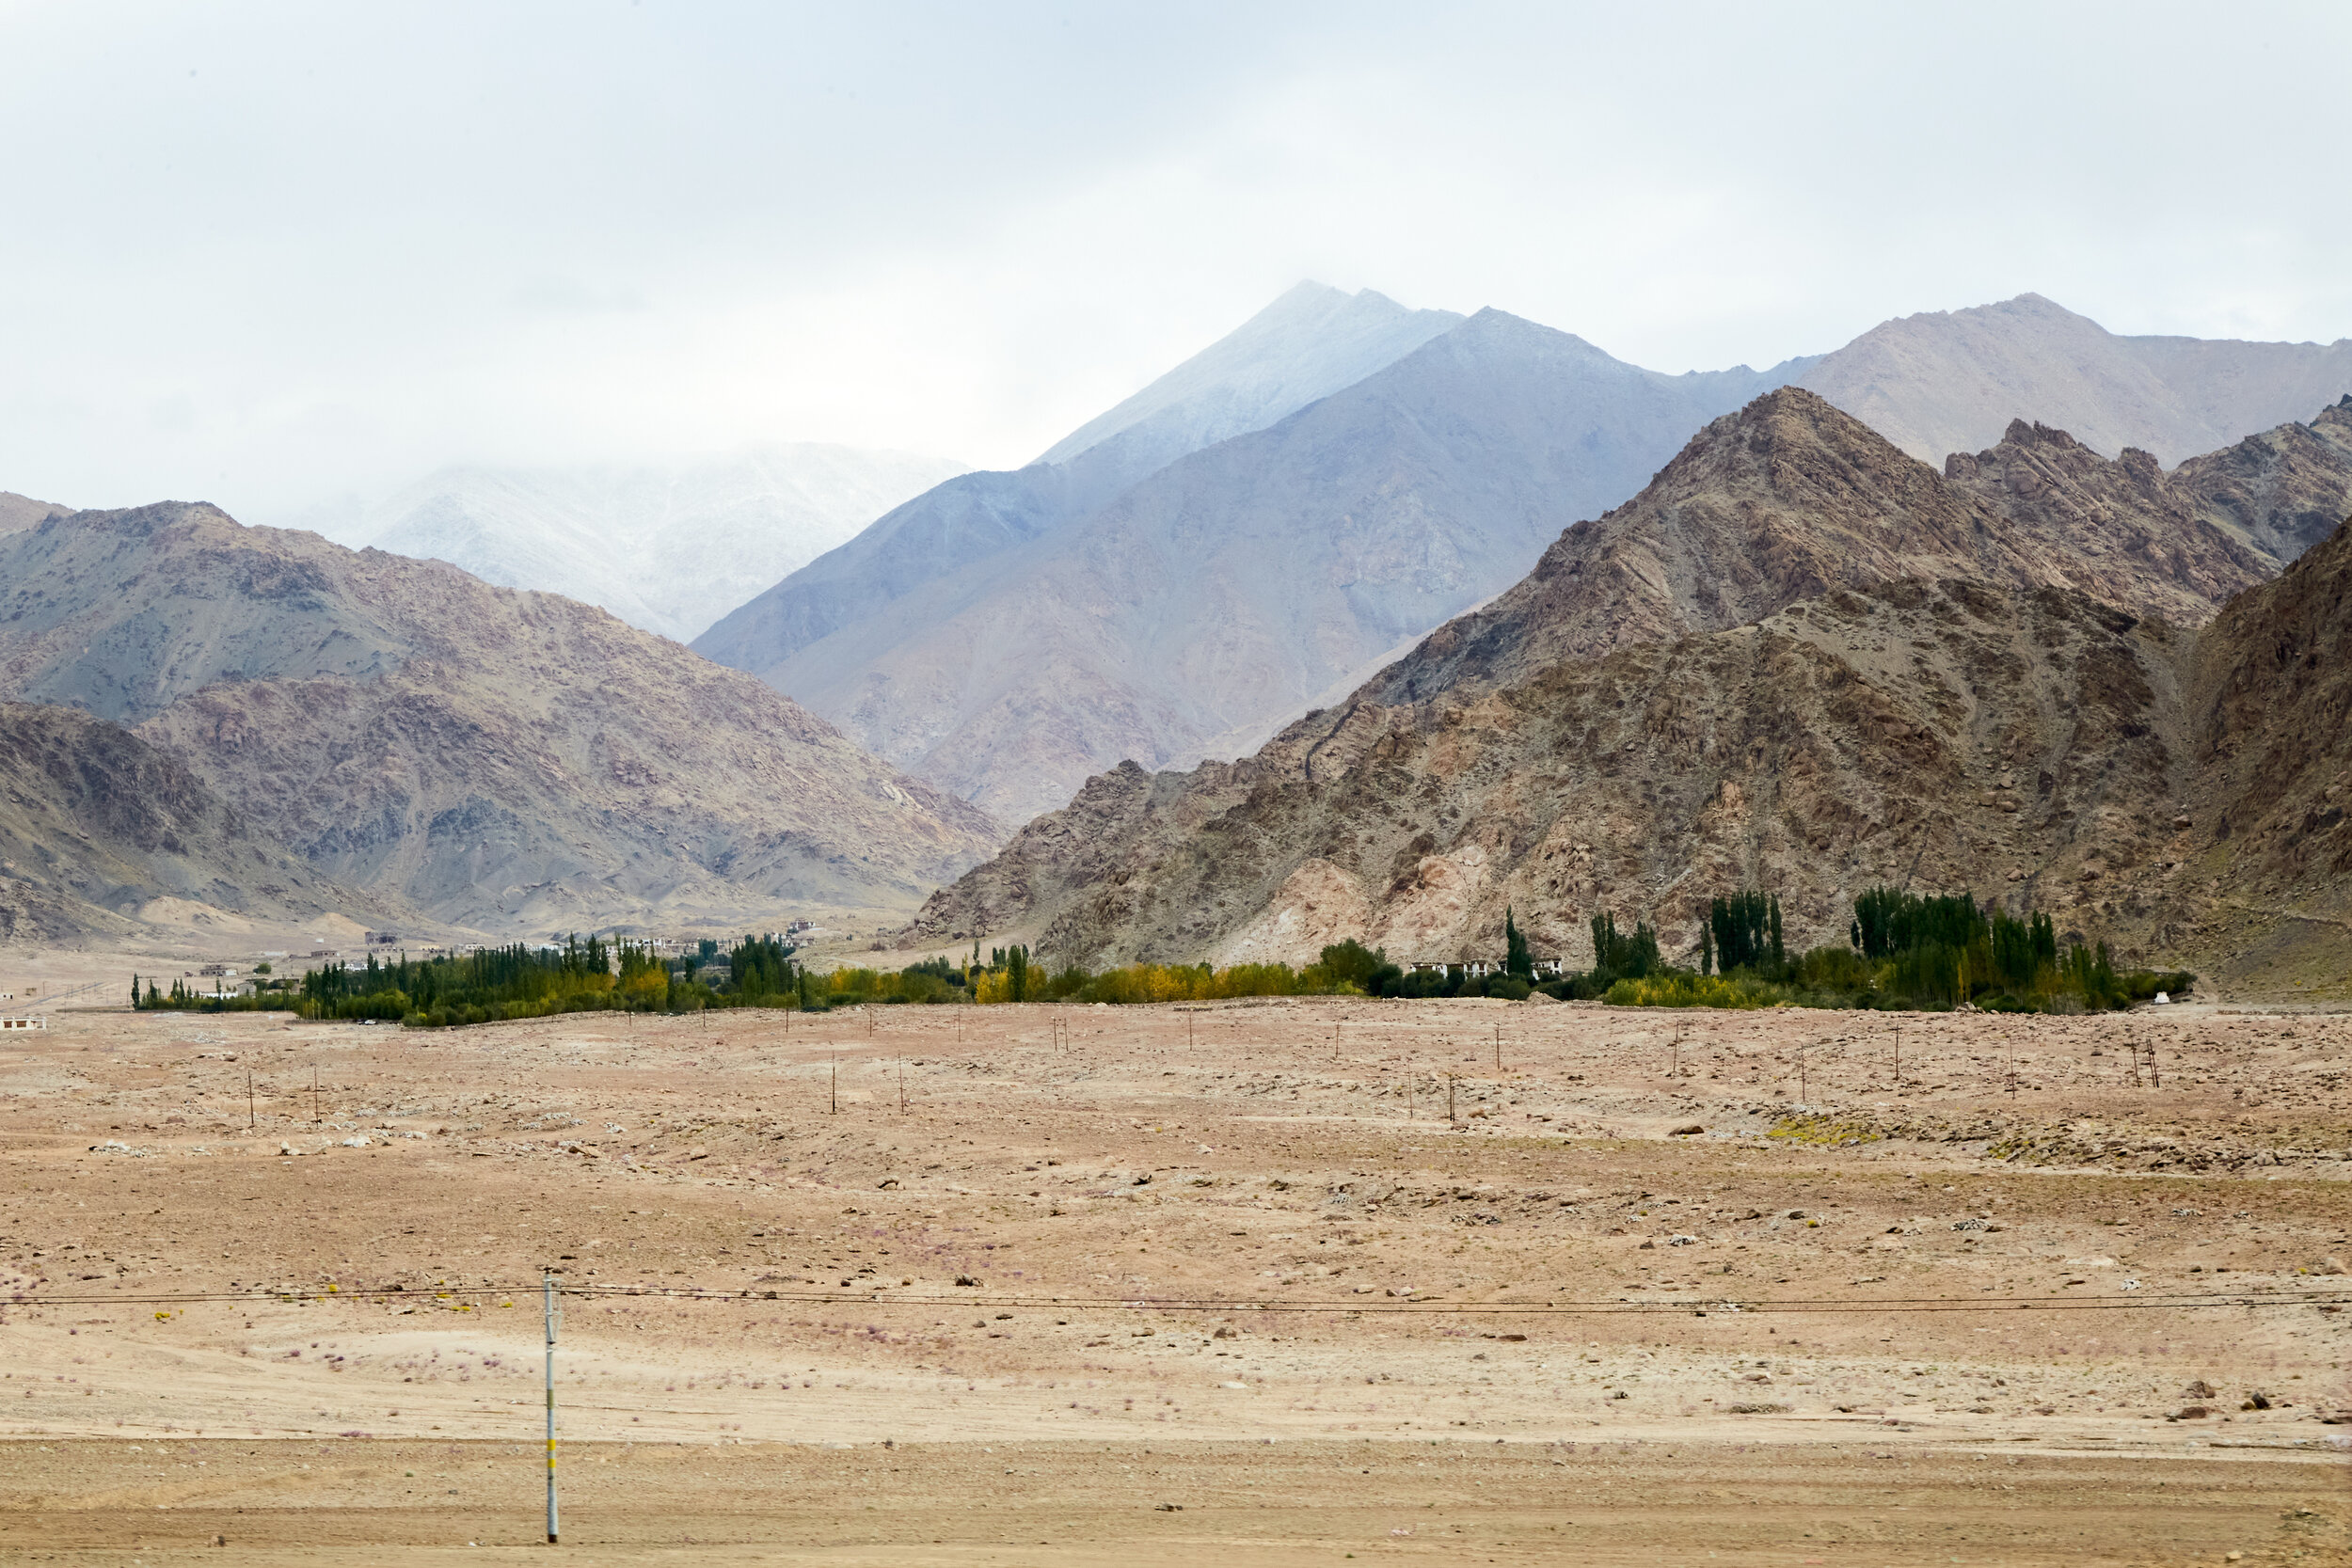  A small village out in a barren land surrounded by hills 